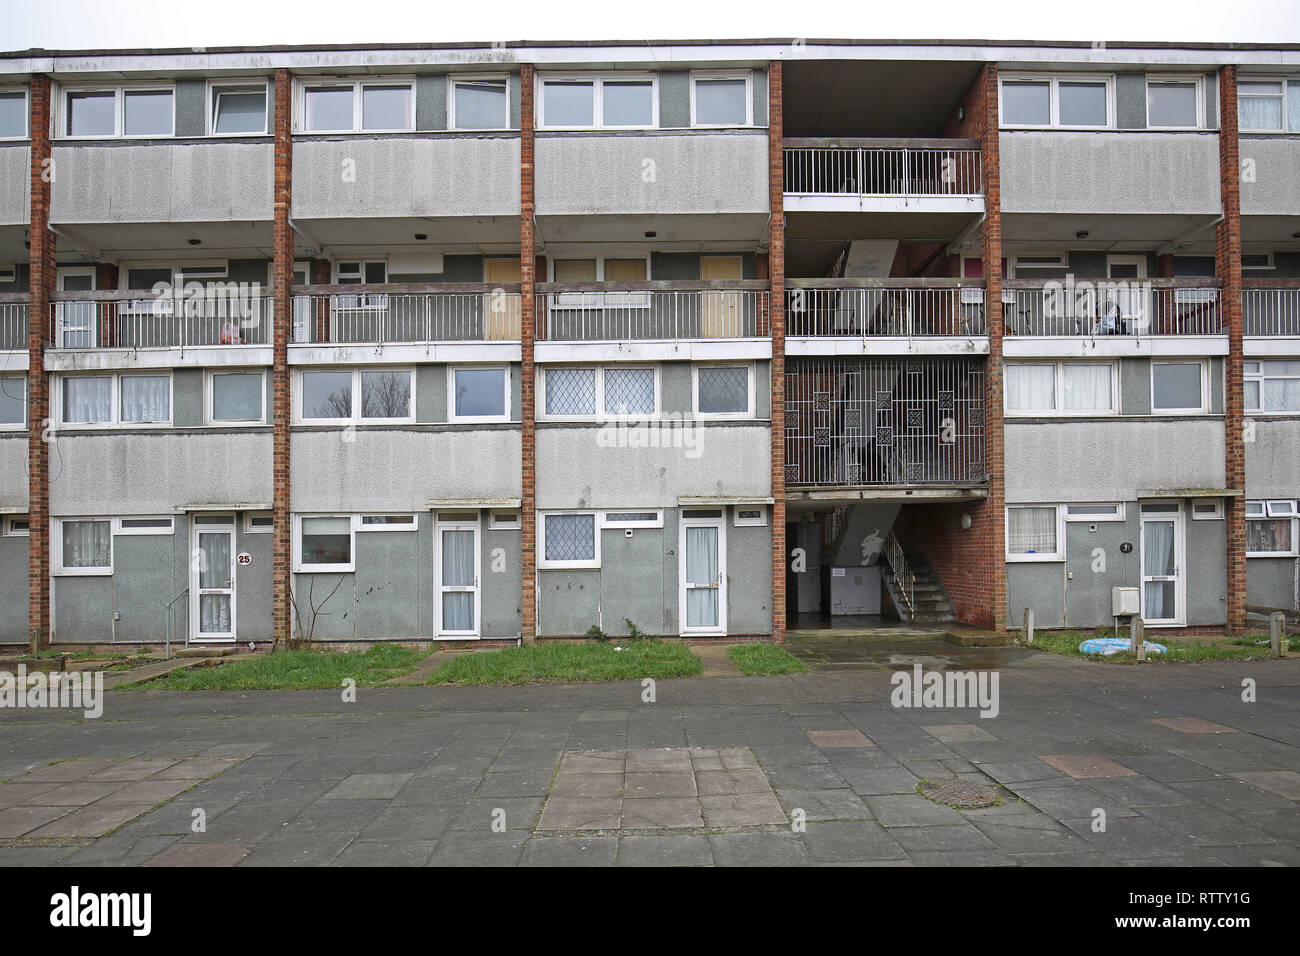 A run-down, four storey block of council maisononets in Basildon, Essex, UK. Flats still occupied but scheduled for demolition. Stock Photo